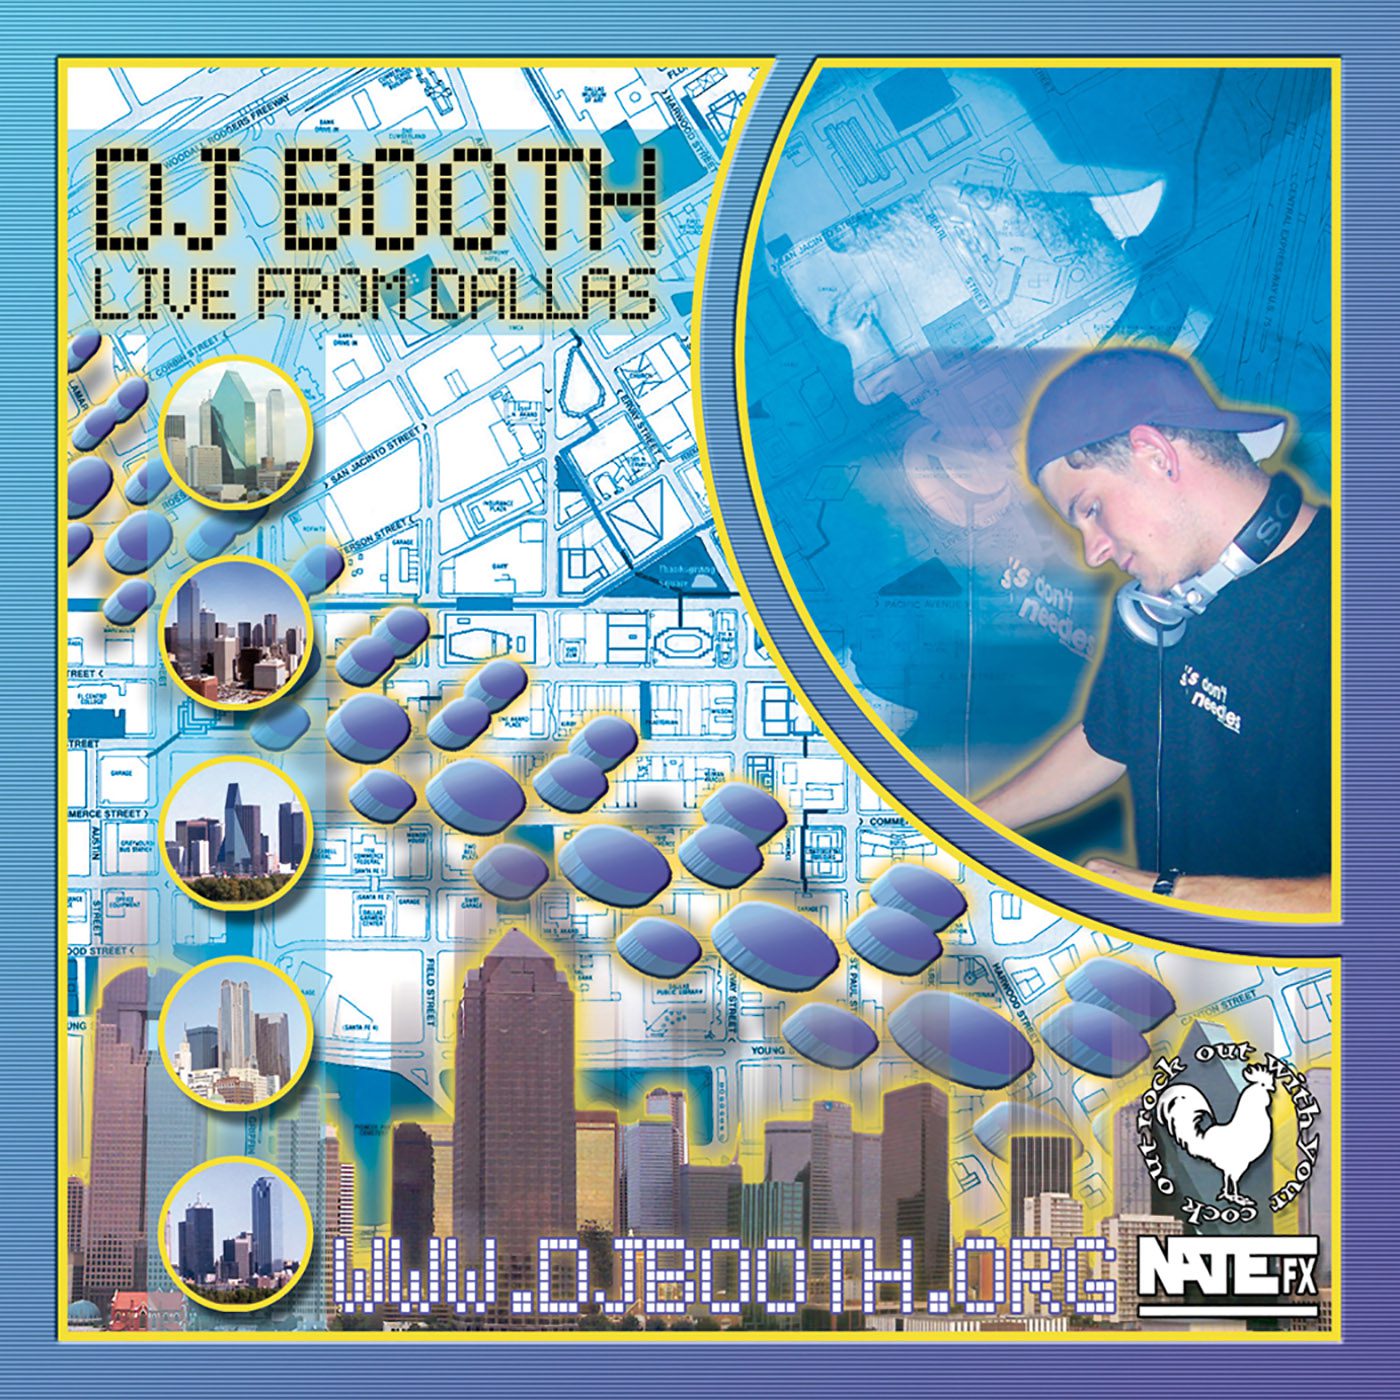 DJ Booth – Live From Dallas